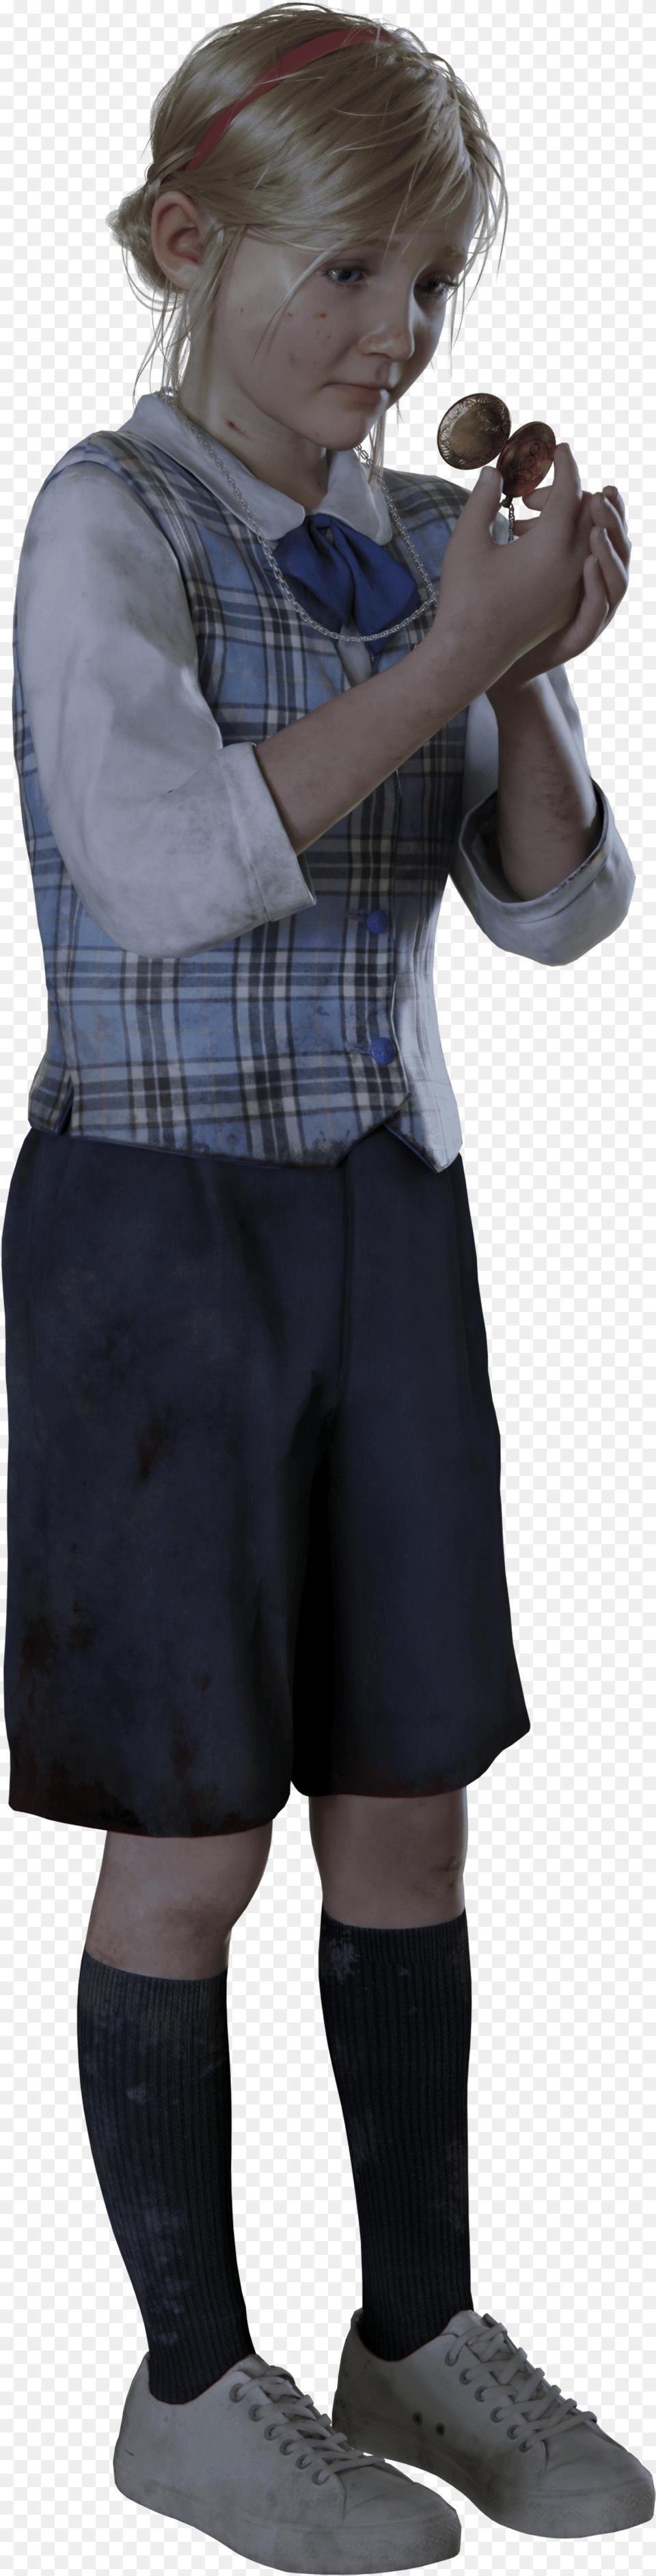 Zombie Render Free Transparent Png